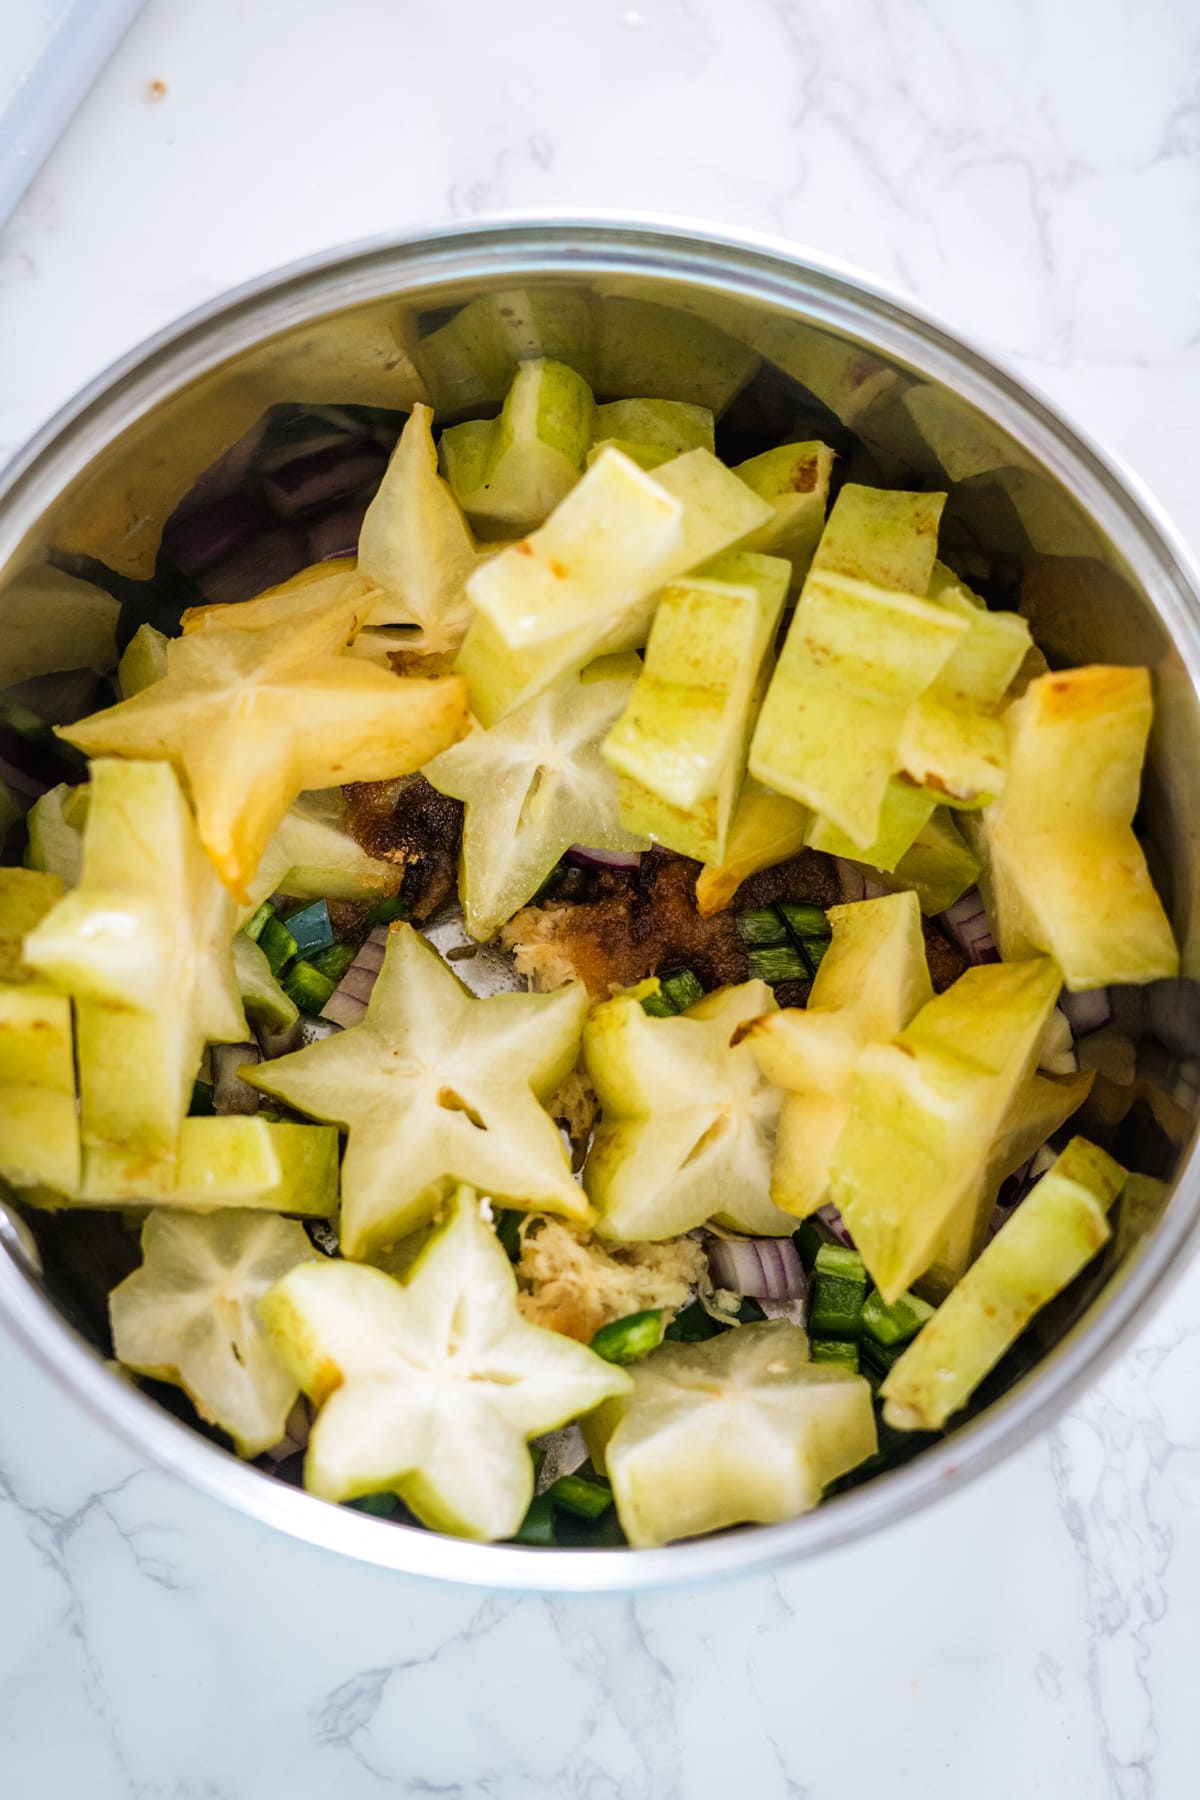 A bowl full of chopped apples, celery, and star fruit chutney.